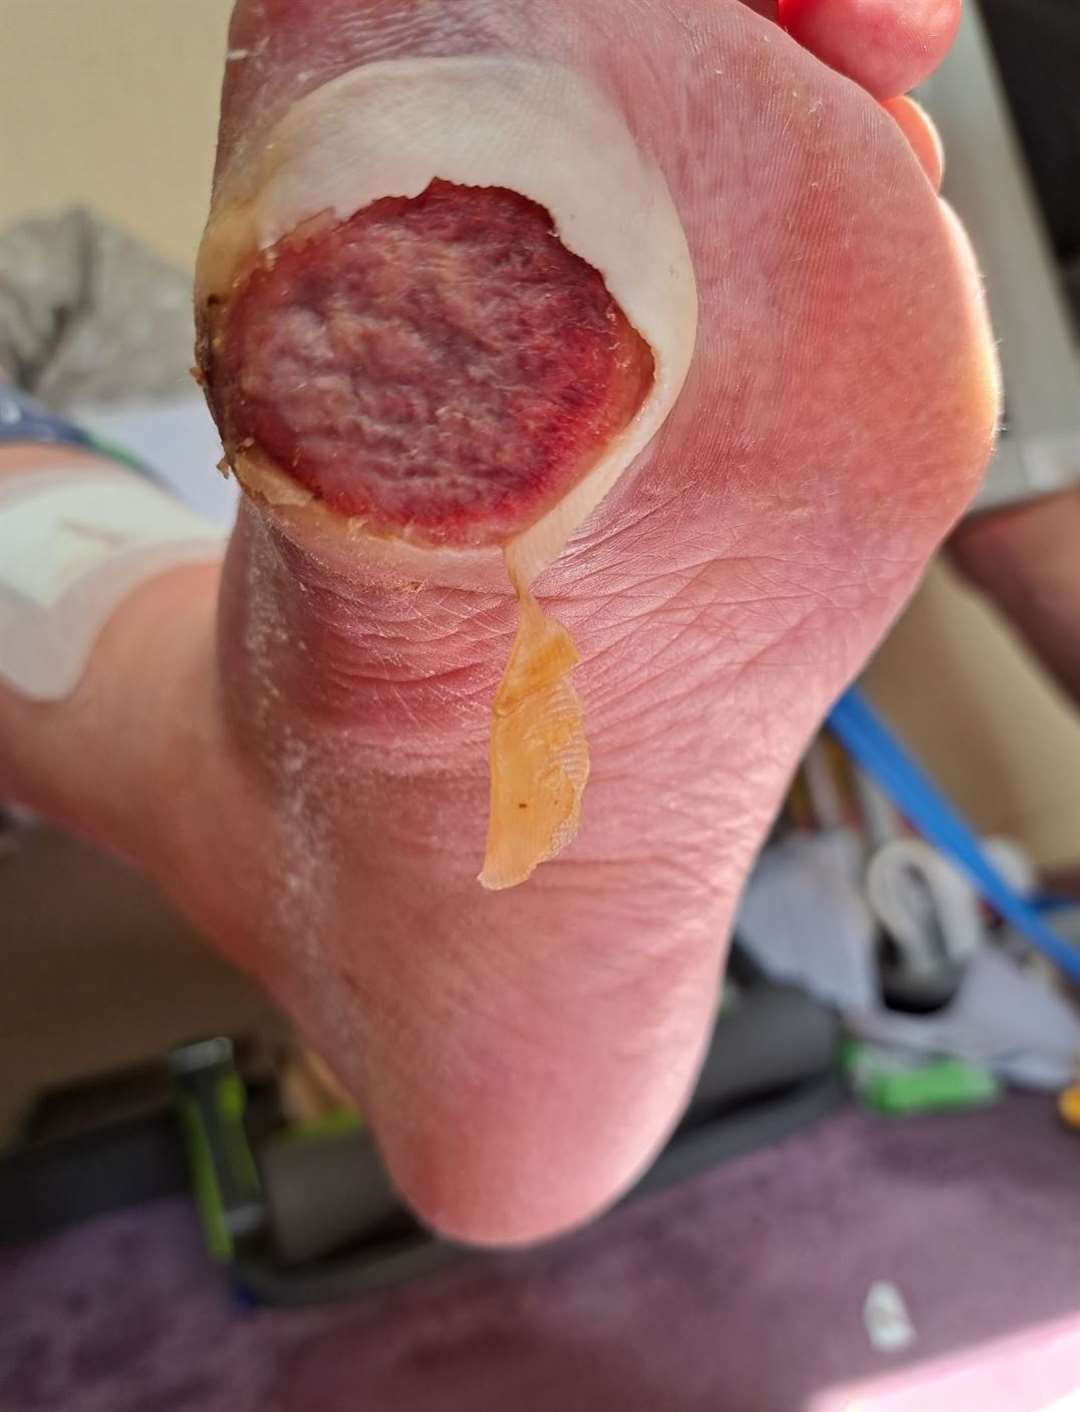 WARNING: Graphic image. The blister on Mrs Medhurst's foot, as captured by her granddaughter in July. Photo: Family release